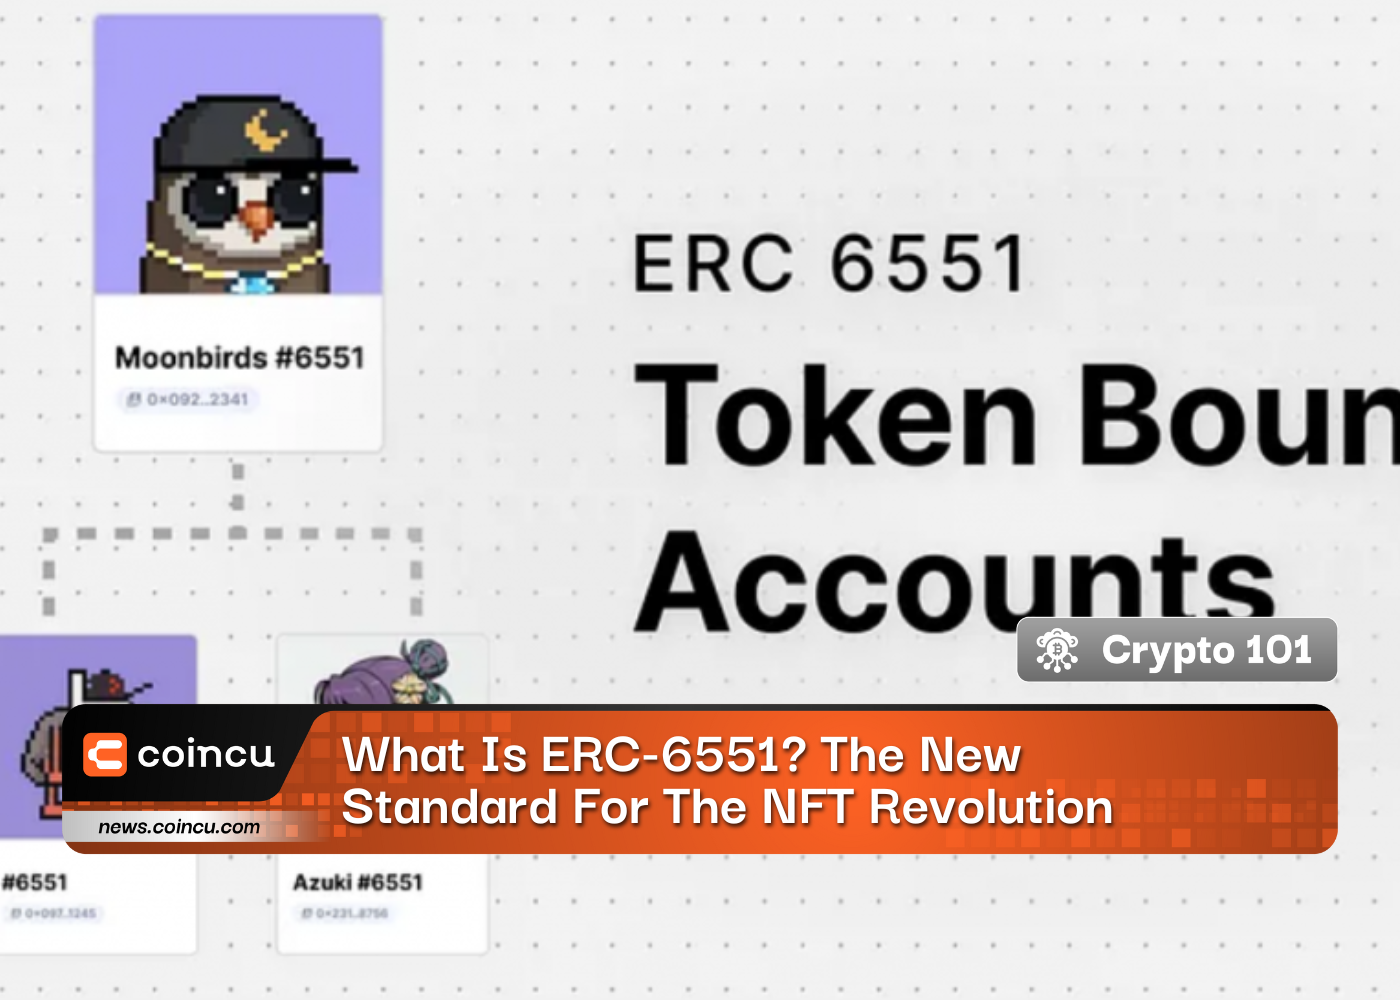 What Is ERC-6551? The New Standard For The NFT Revolution